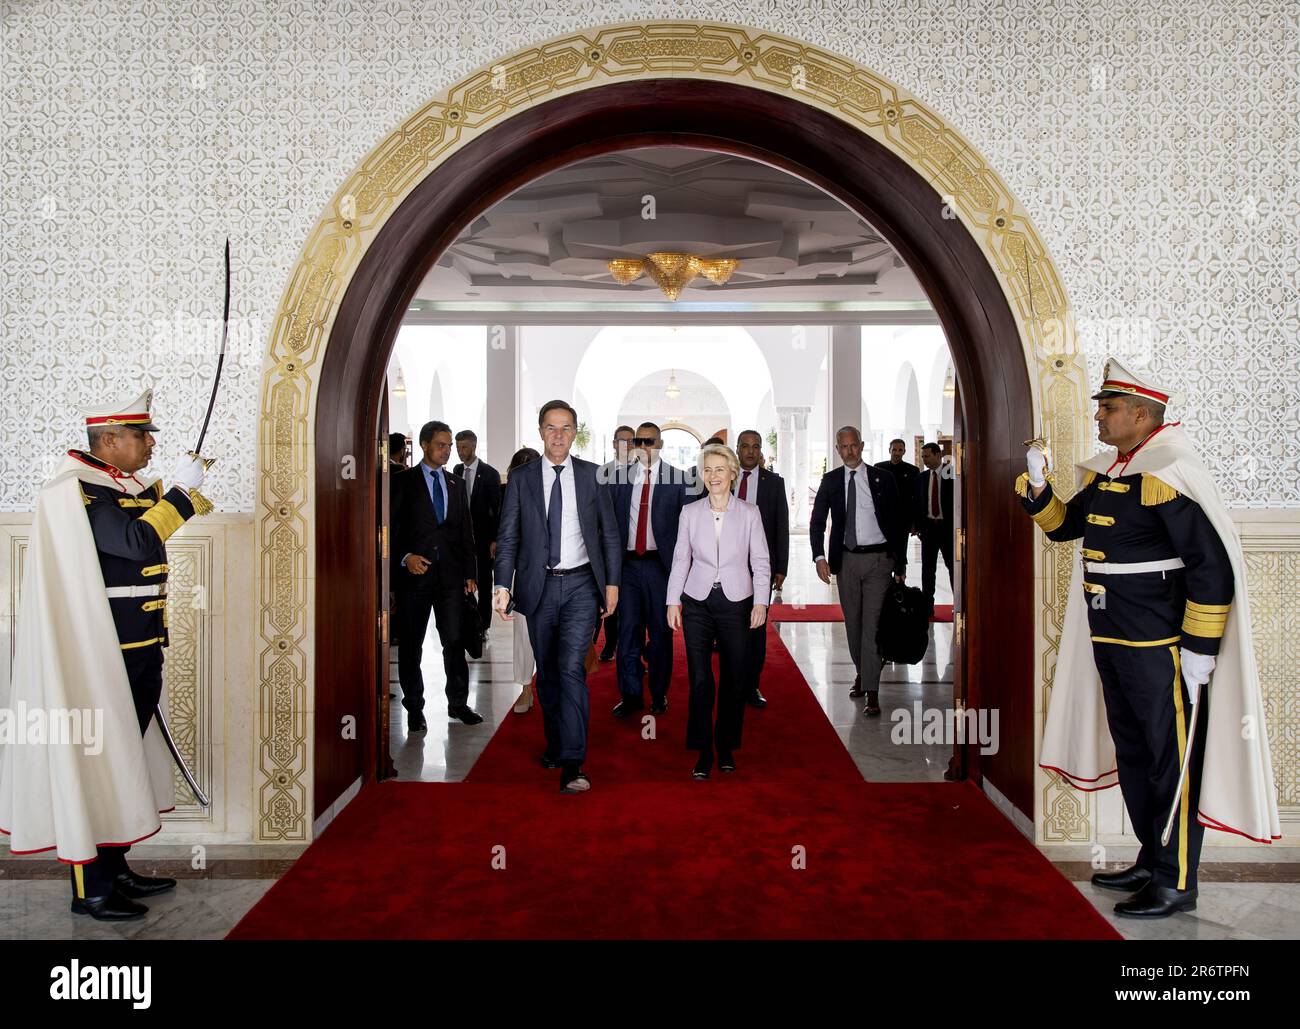 TUNIS - Prime Minister Mark Rutte, together with President Ursula von der Leyen of the European Commission and Italian Prime Minister Giorgia Meloni, visits Tunisian President Kais Saied. The European Union wants to make agreements with the North African country to curb illegal migration. ANP KOEN VAN WEEL netherlands out - belgium out Stock Photo